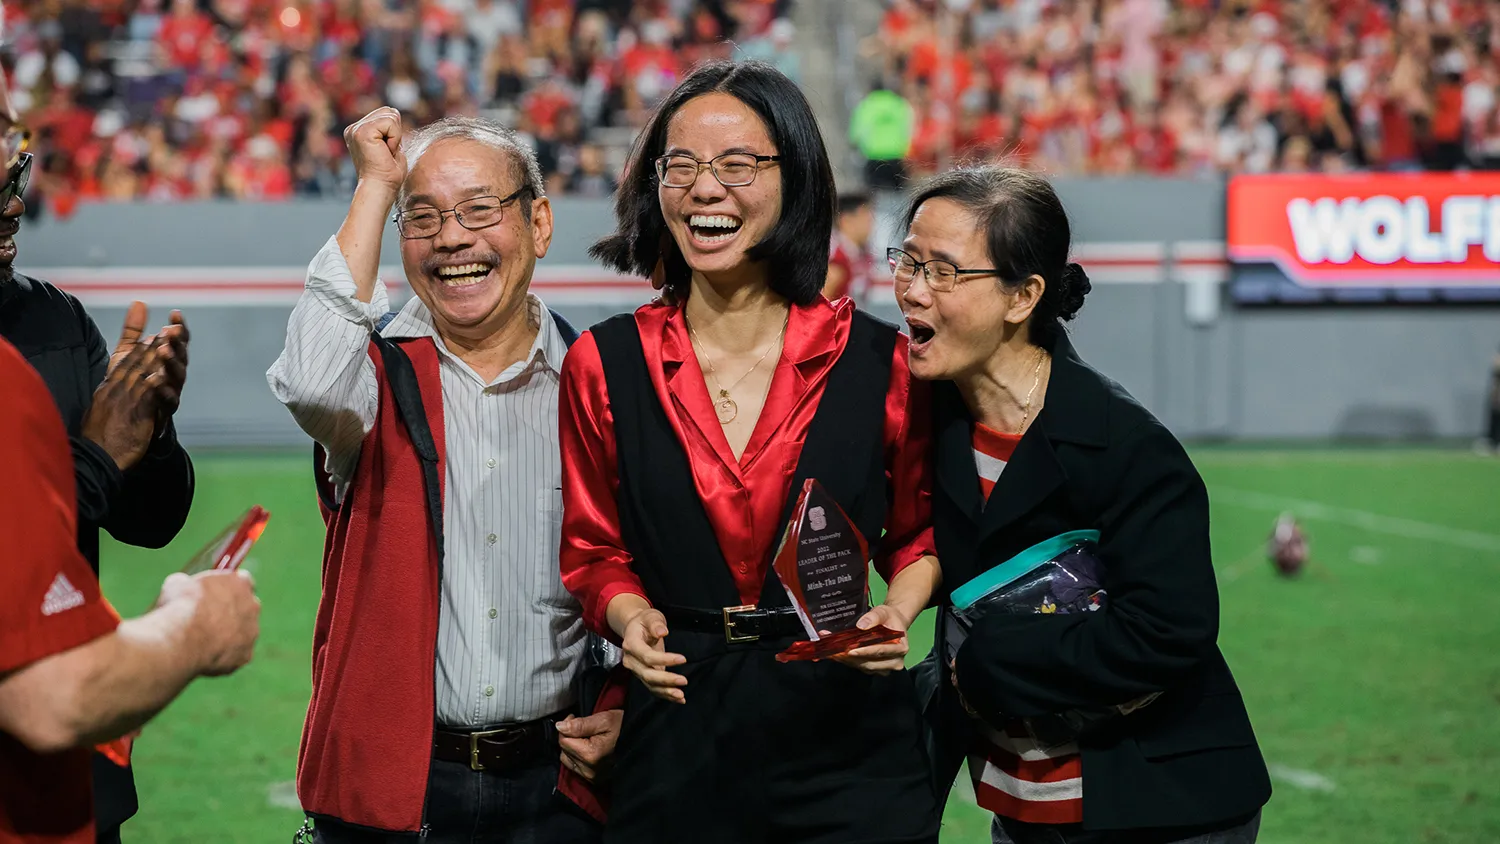 Minh-Thu Dinh stands with family on the football field during halftime to accept the Leader of the Pack award.